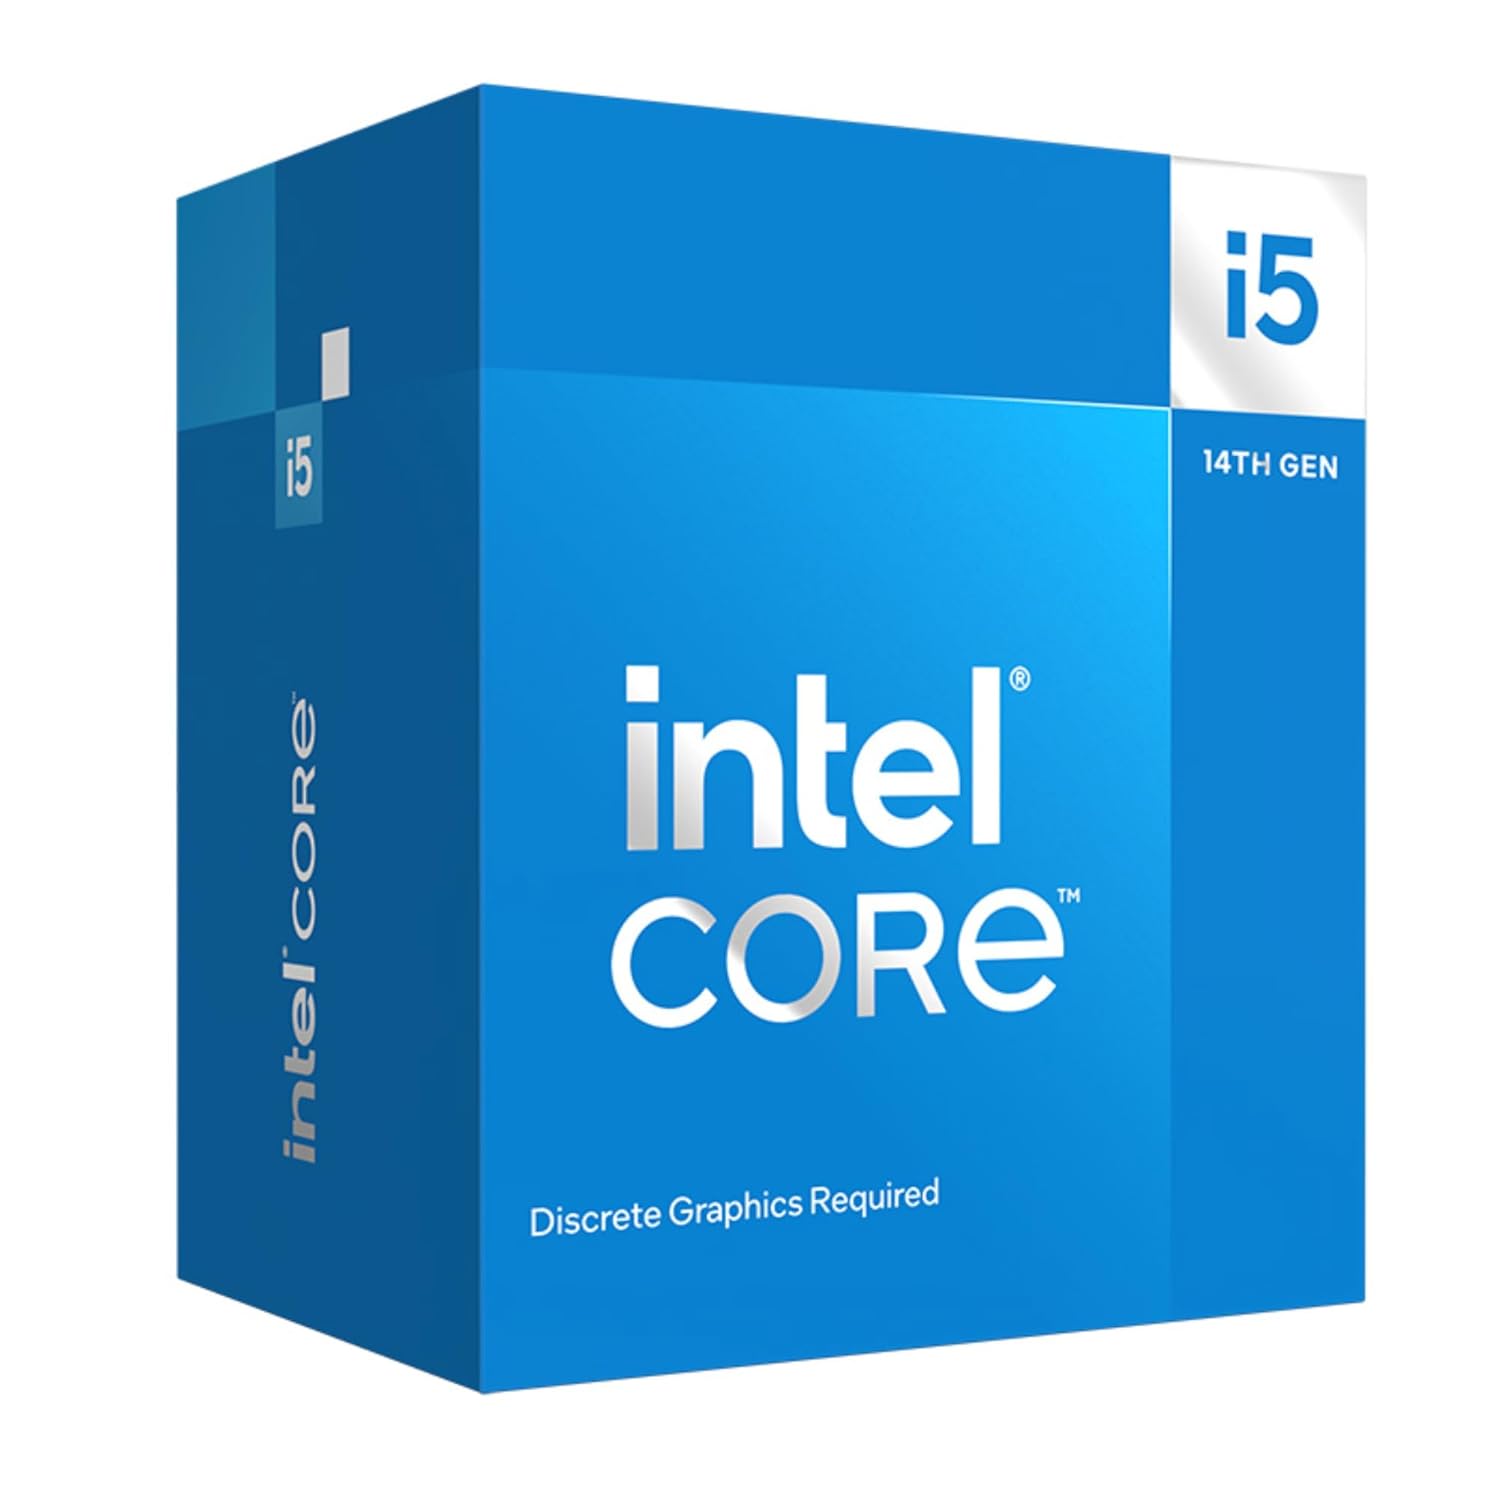 Intel Core i5 14400F Processor, 10-Core, 16-Thread, up to 4.7 GHz Turbo Frequency, Intel 7 Lithography, DDR5 4800 Max Memory Size, 20MB Intel Smart Cache, FCLGA170 Packedsocket, 65W Power, No Integrated GPU - Intel 14th Gen